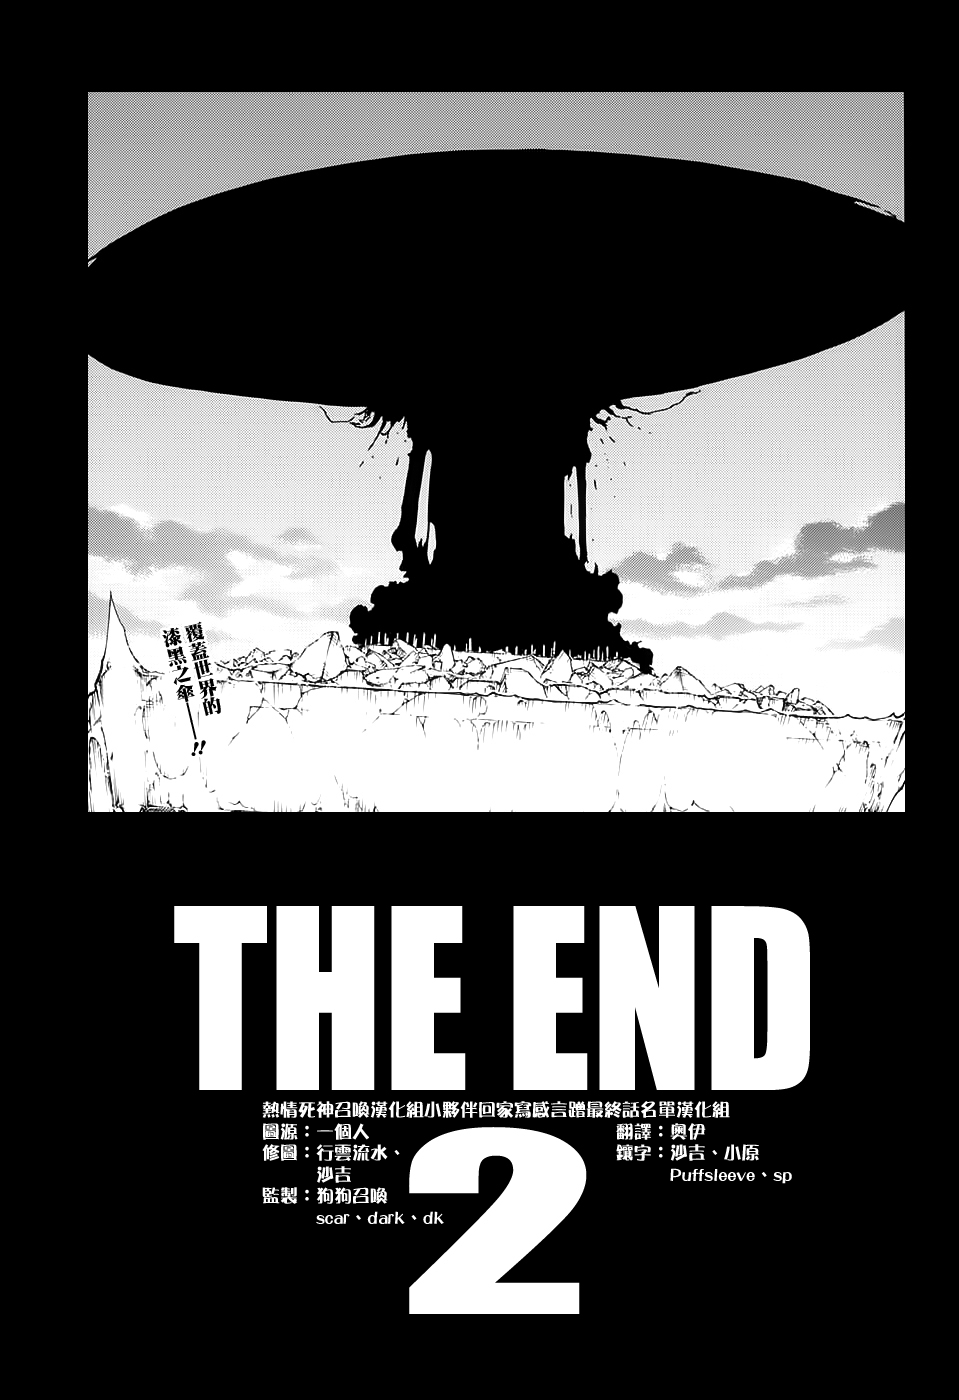 680THE END 2